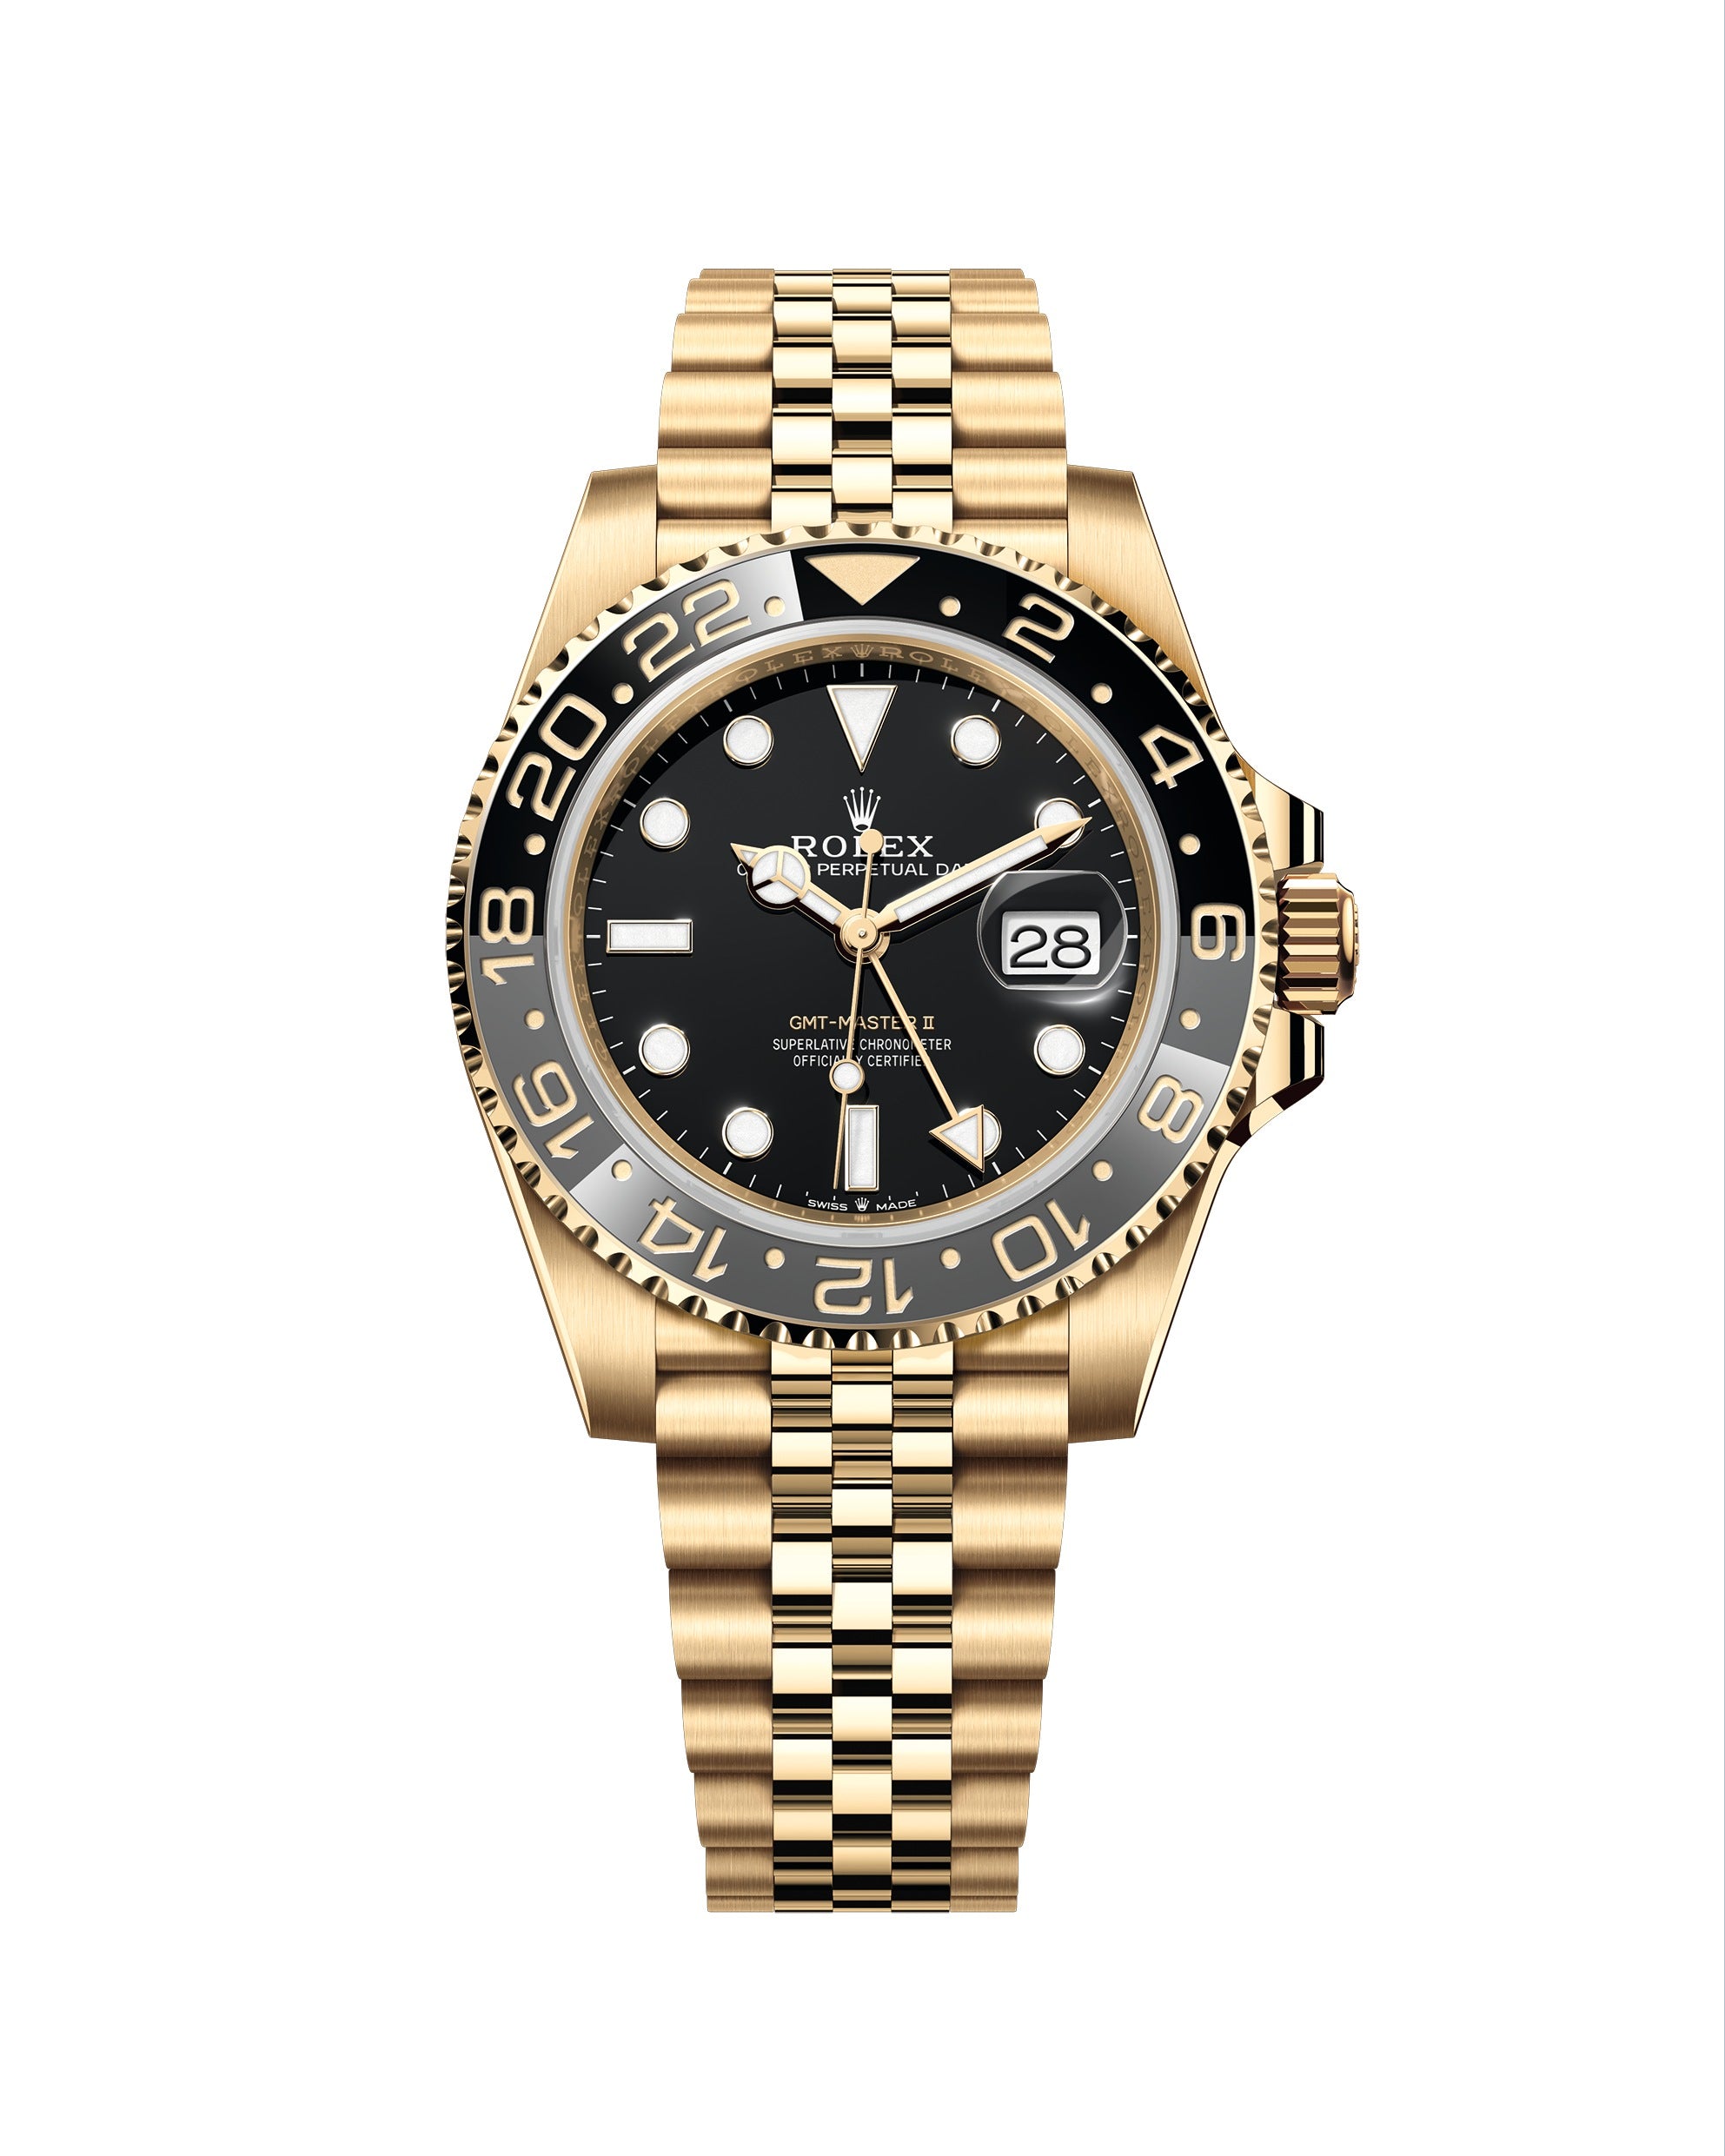 Yellow Gold Rolex Sports Watches Are Glorious; Here Are Three of Them ...